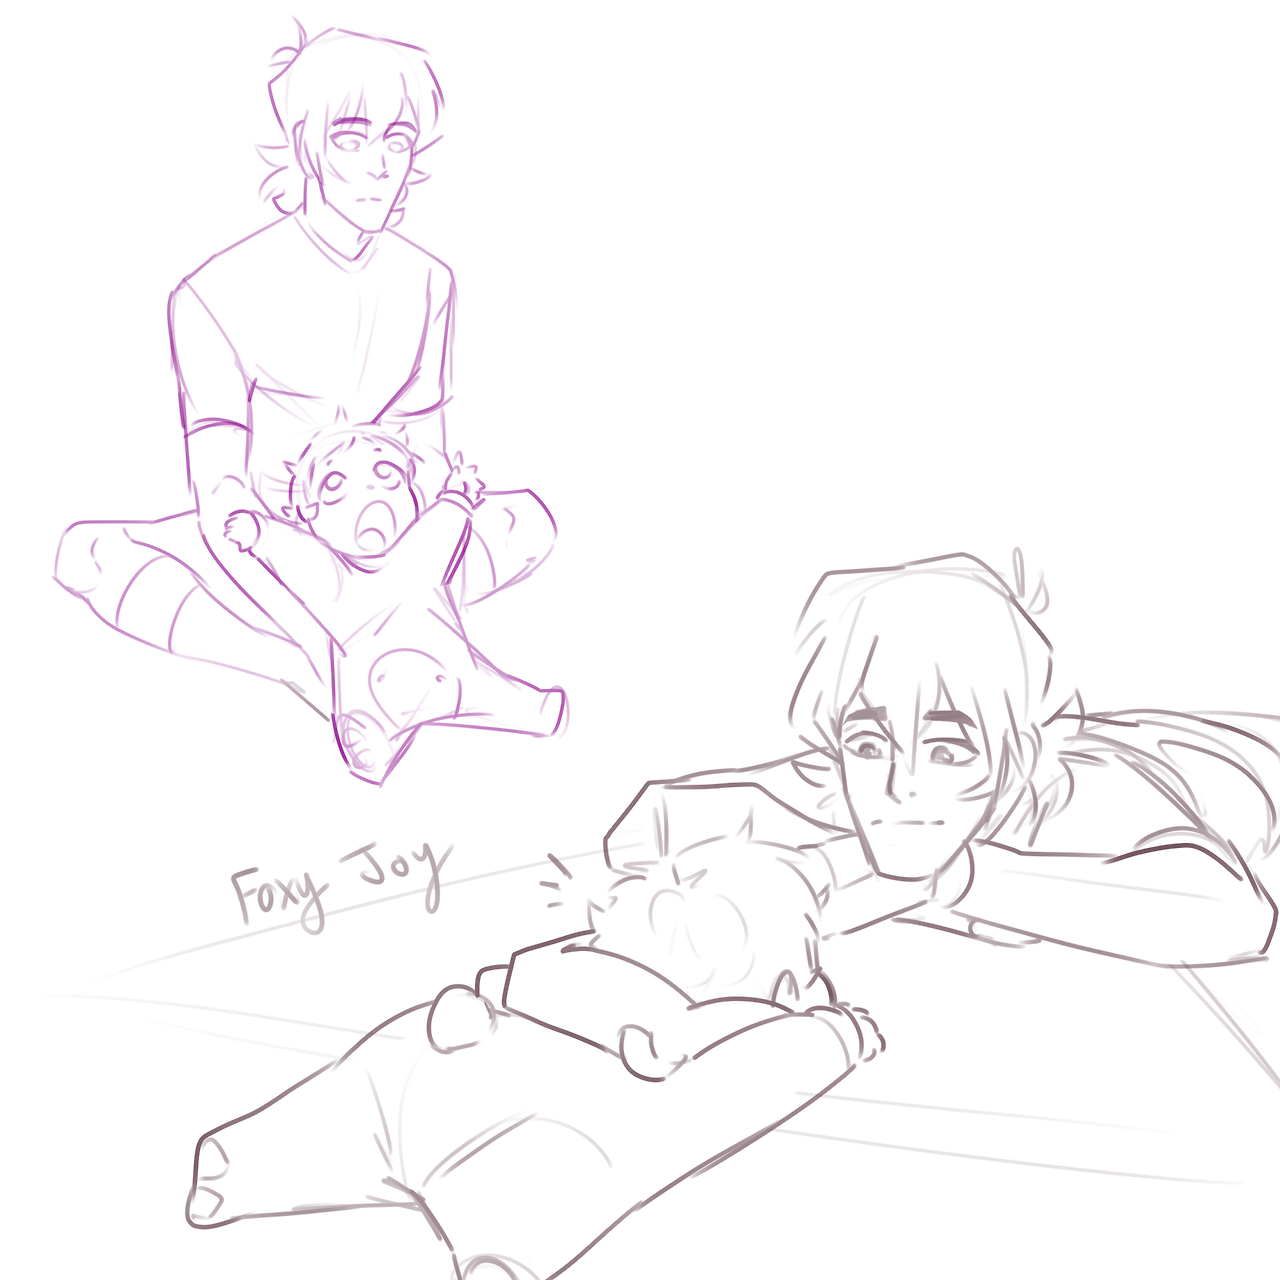 foxyjoy-art:Just imagine for a sec: Keith being good with kids (plus have a bby Lance) 